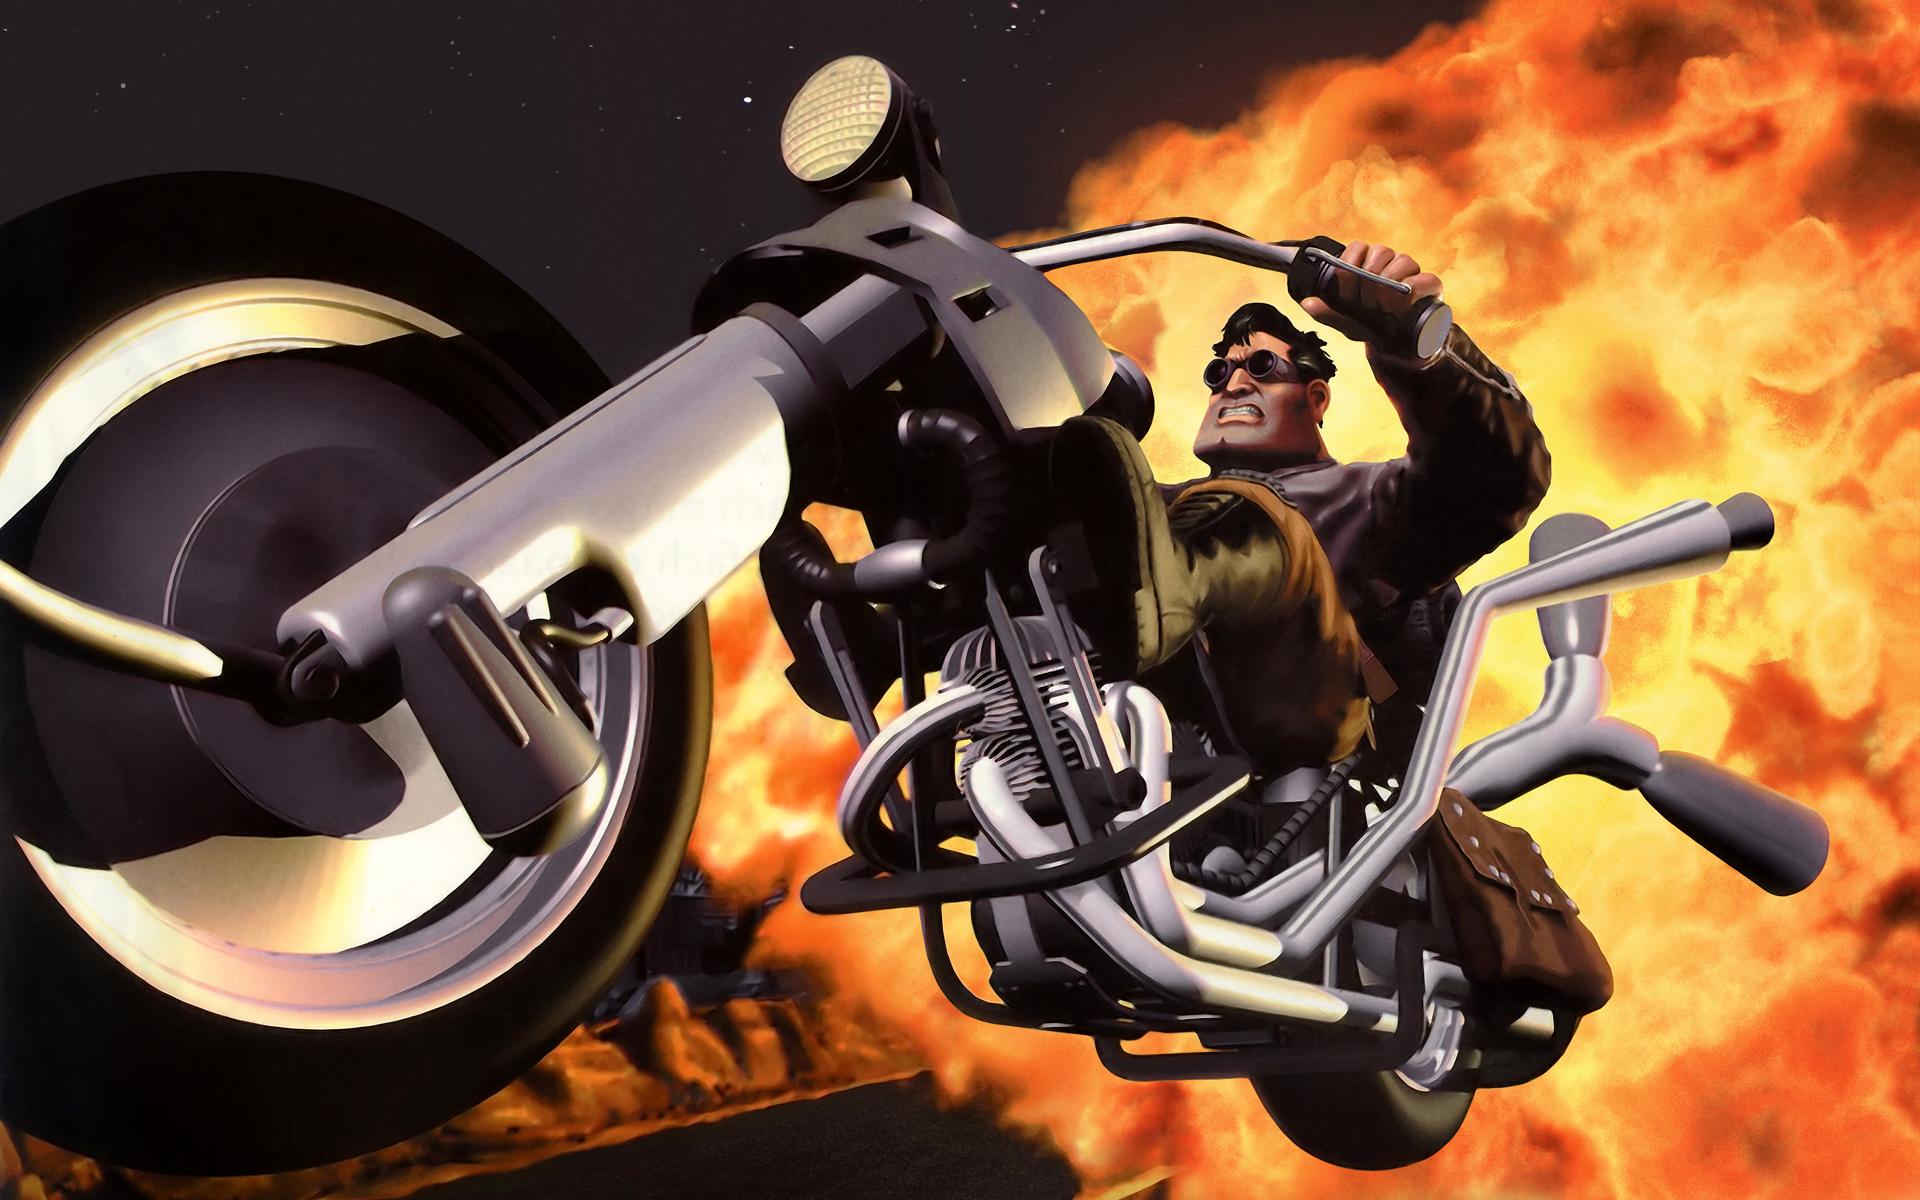 download full throttle cost